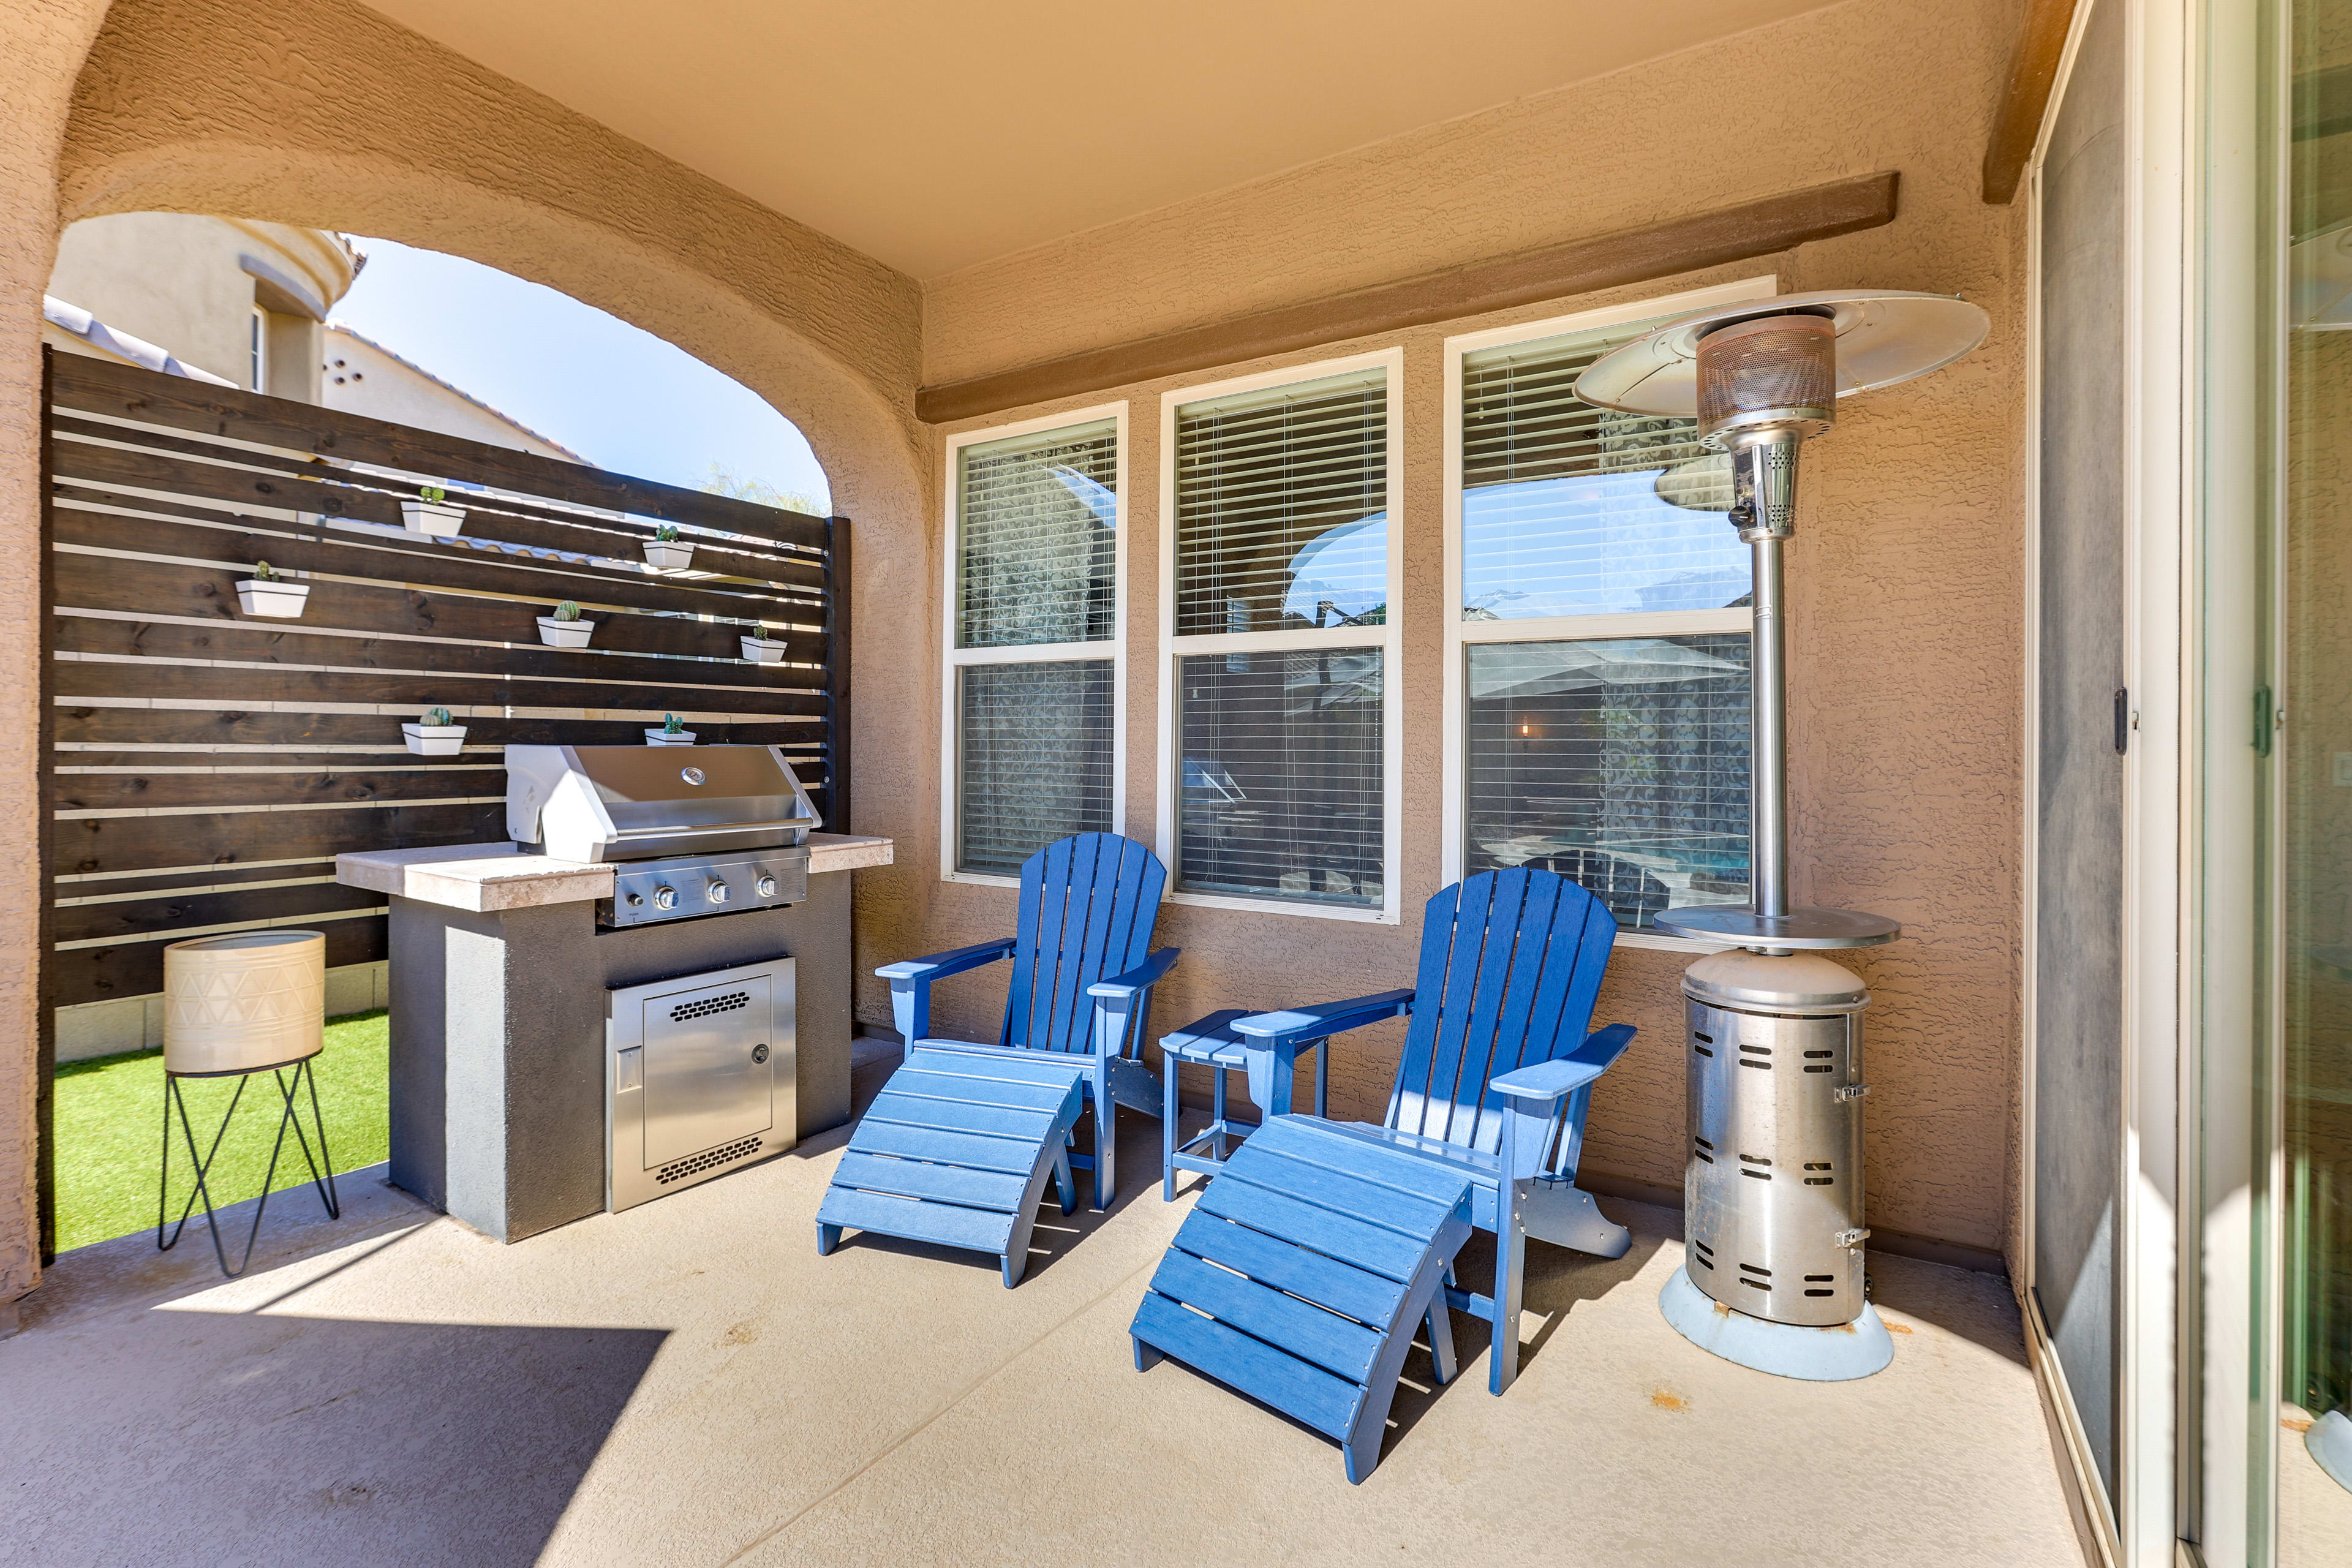 Covered Patio | Gas Grill | Patio Heater